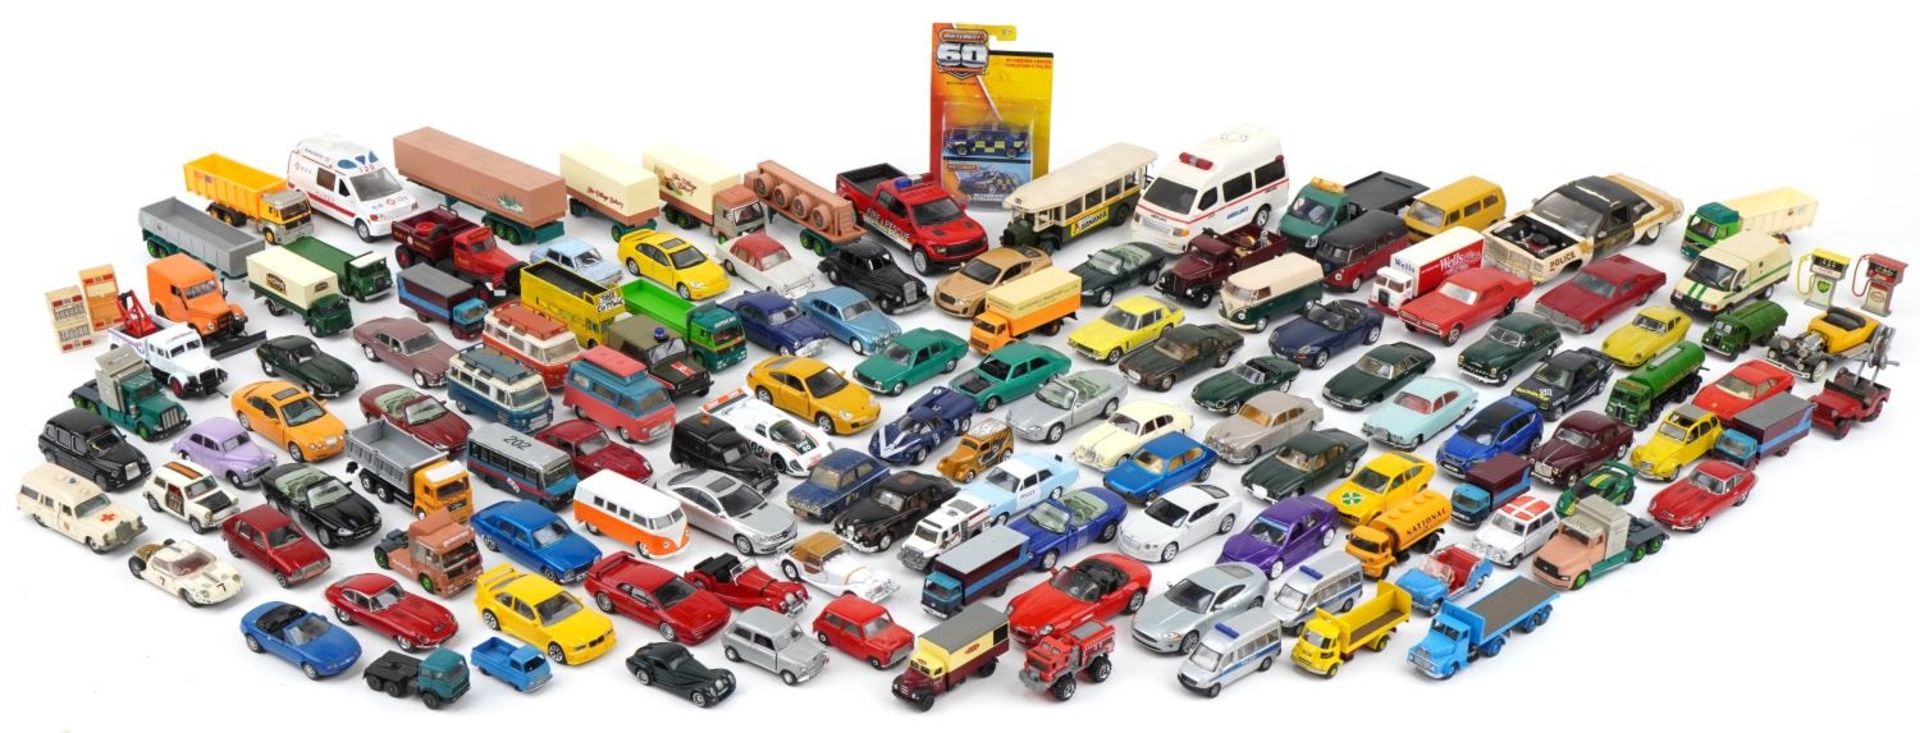 Large collection of vintage and later collector's vehicles, predominantly diecast, including